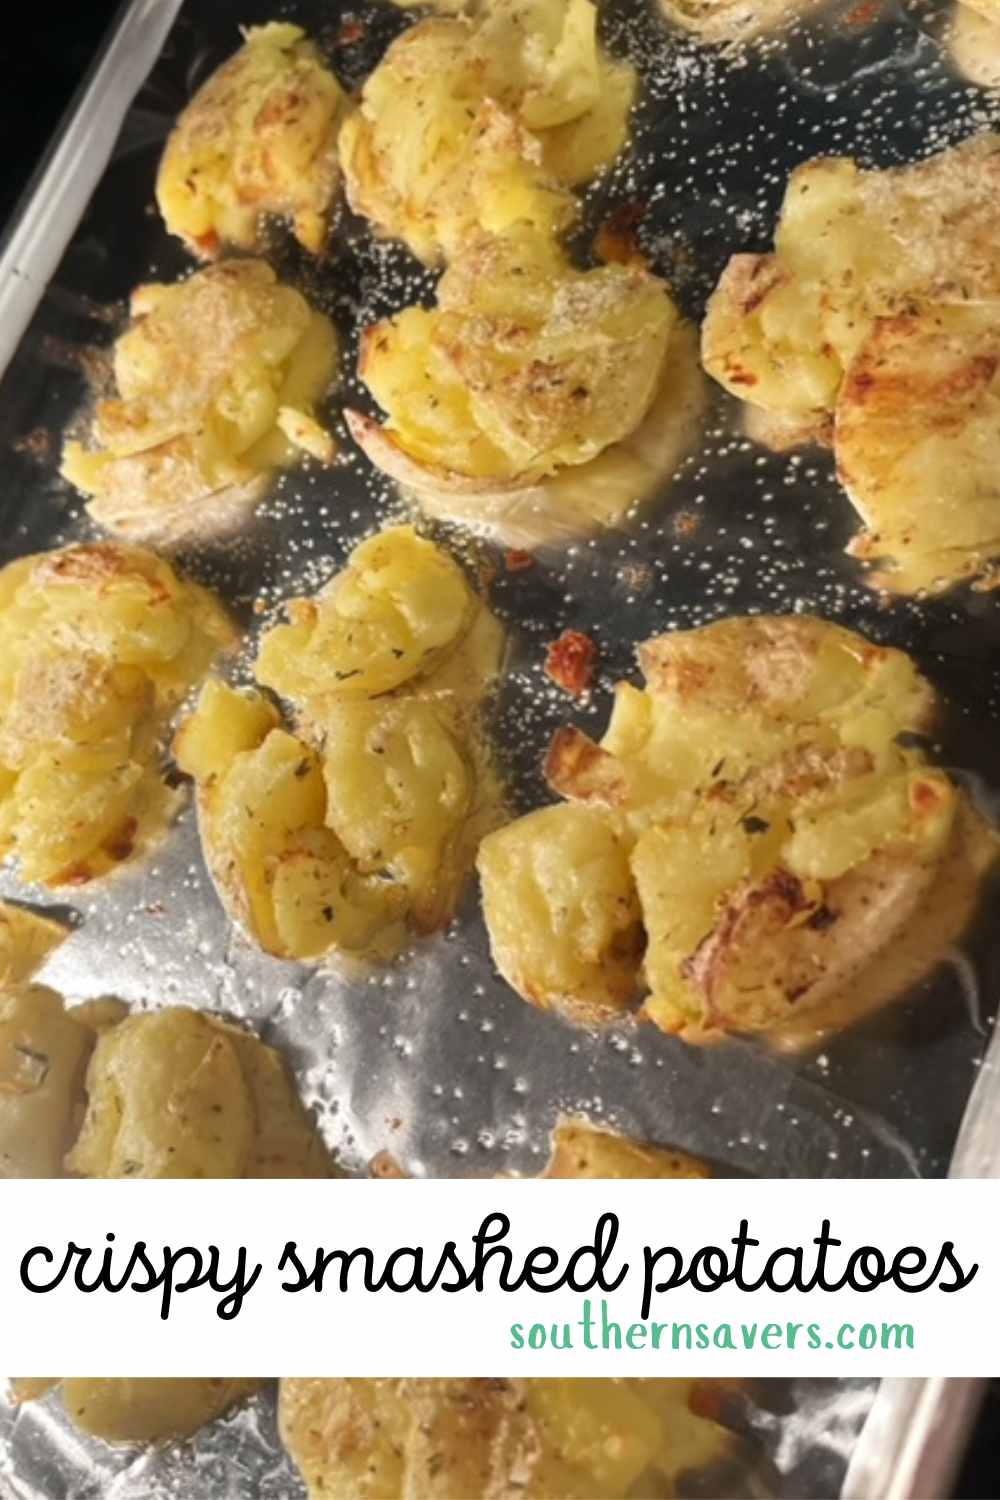 Calling all potato lovers! This recipe for crispy smashed potatoes is a great side dish with crispy edges and buttery insides.